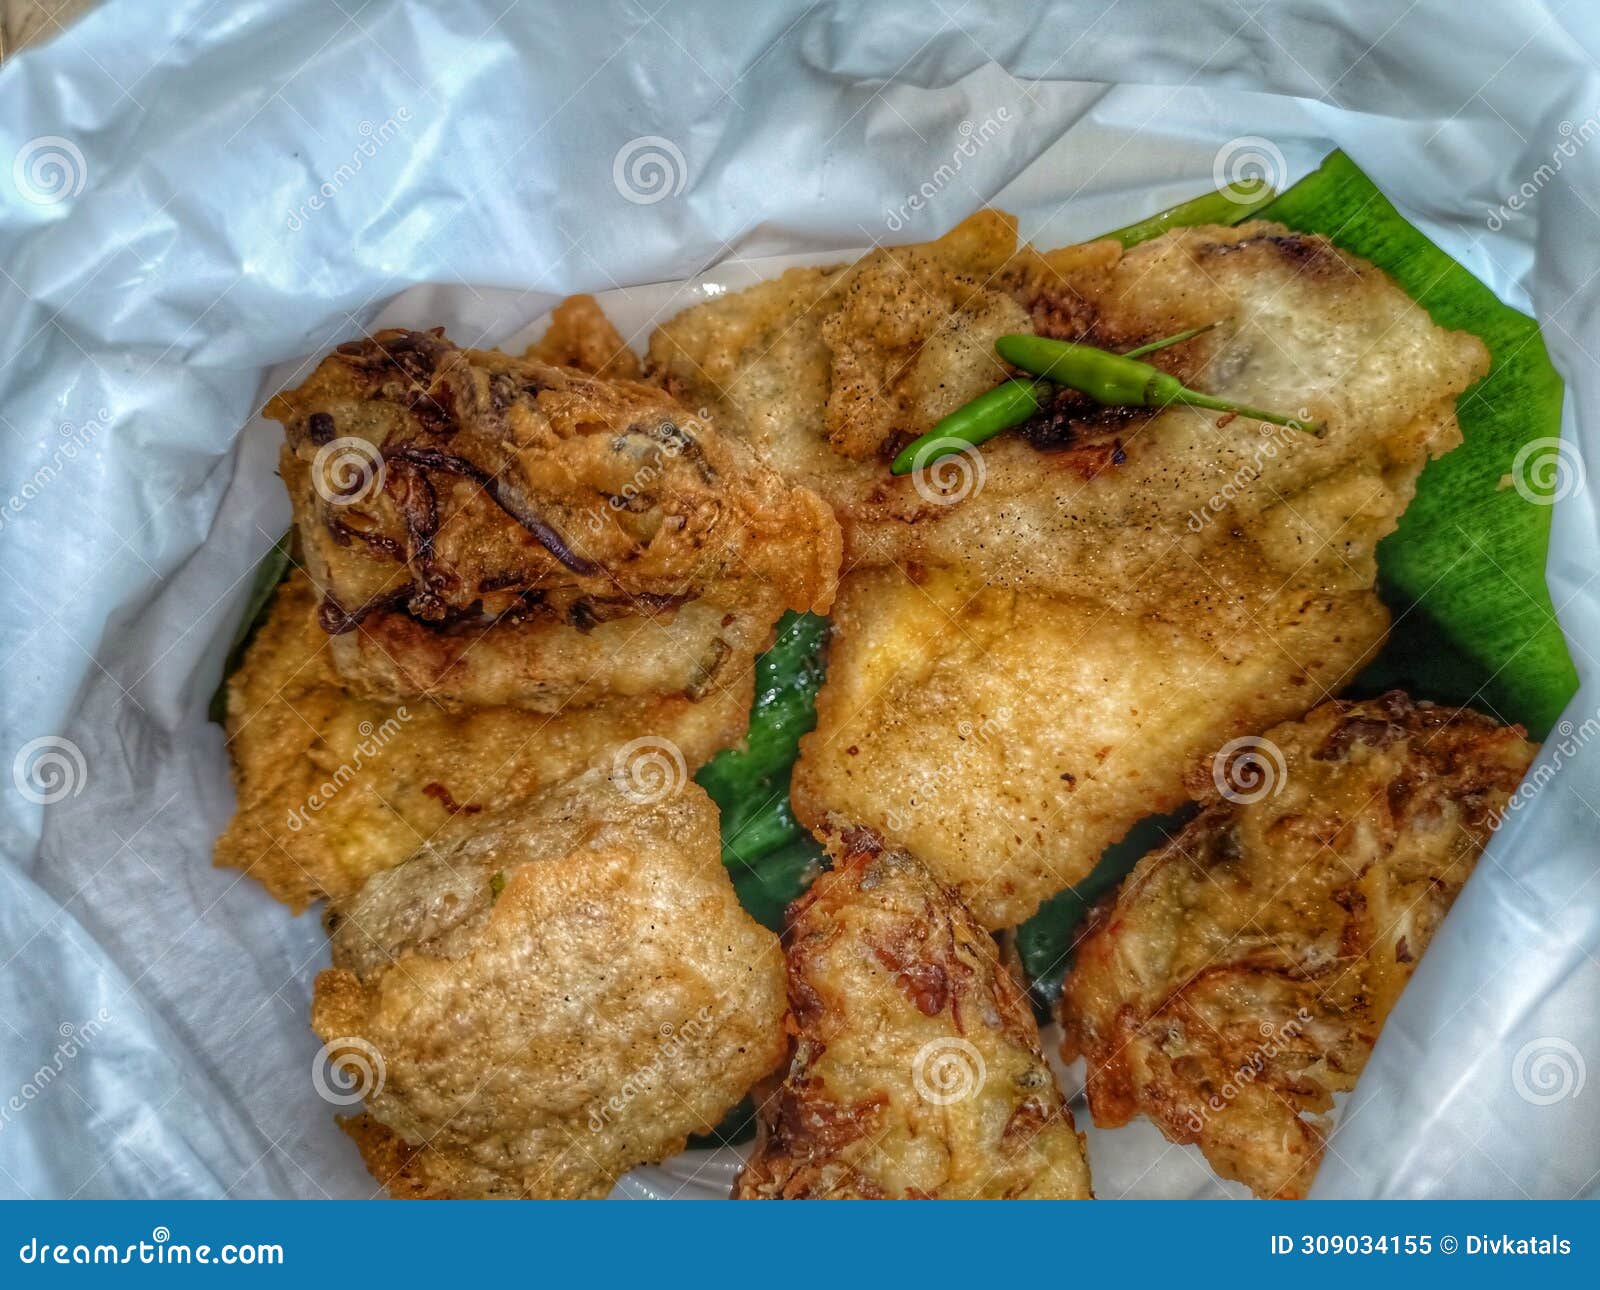 gorengan refers to a variety of deep-fried snacks in indonesian cuisine.